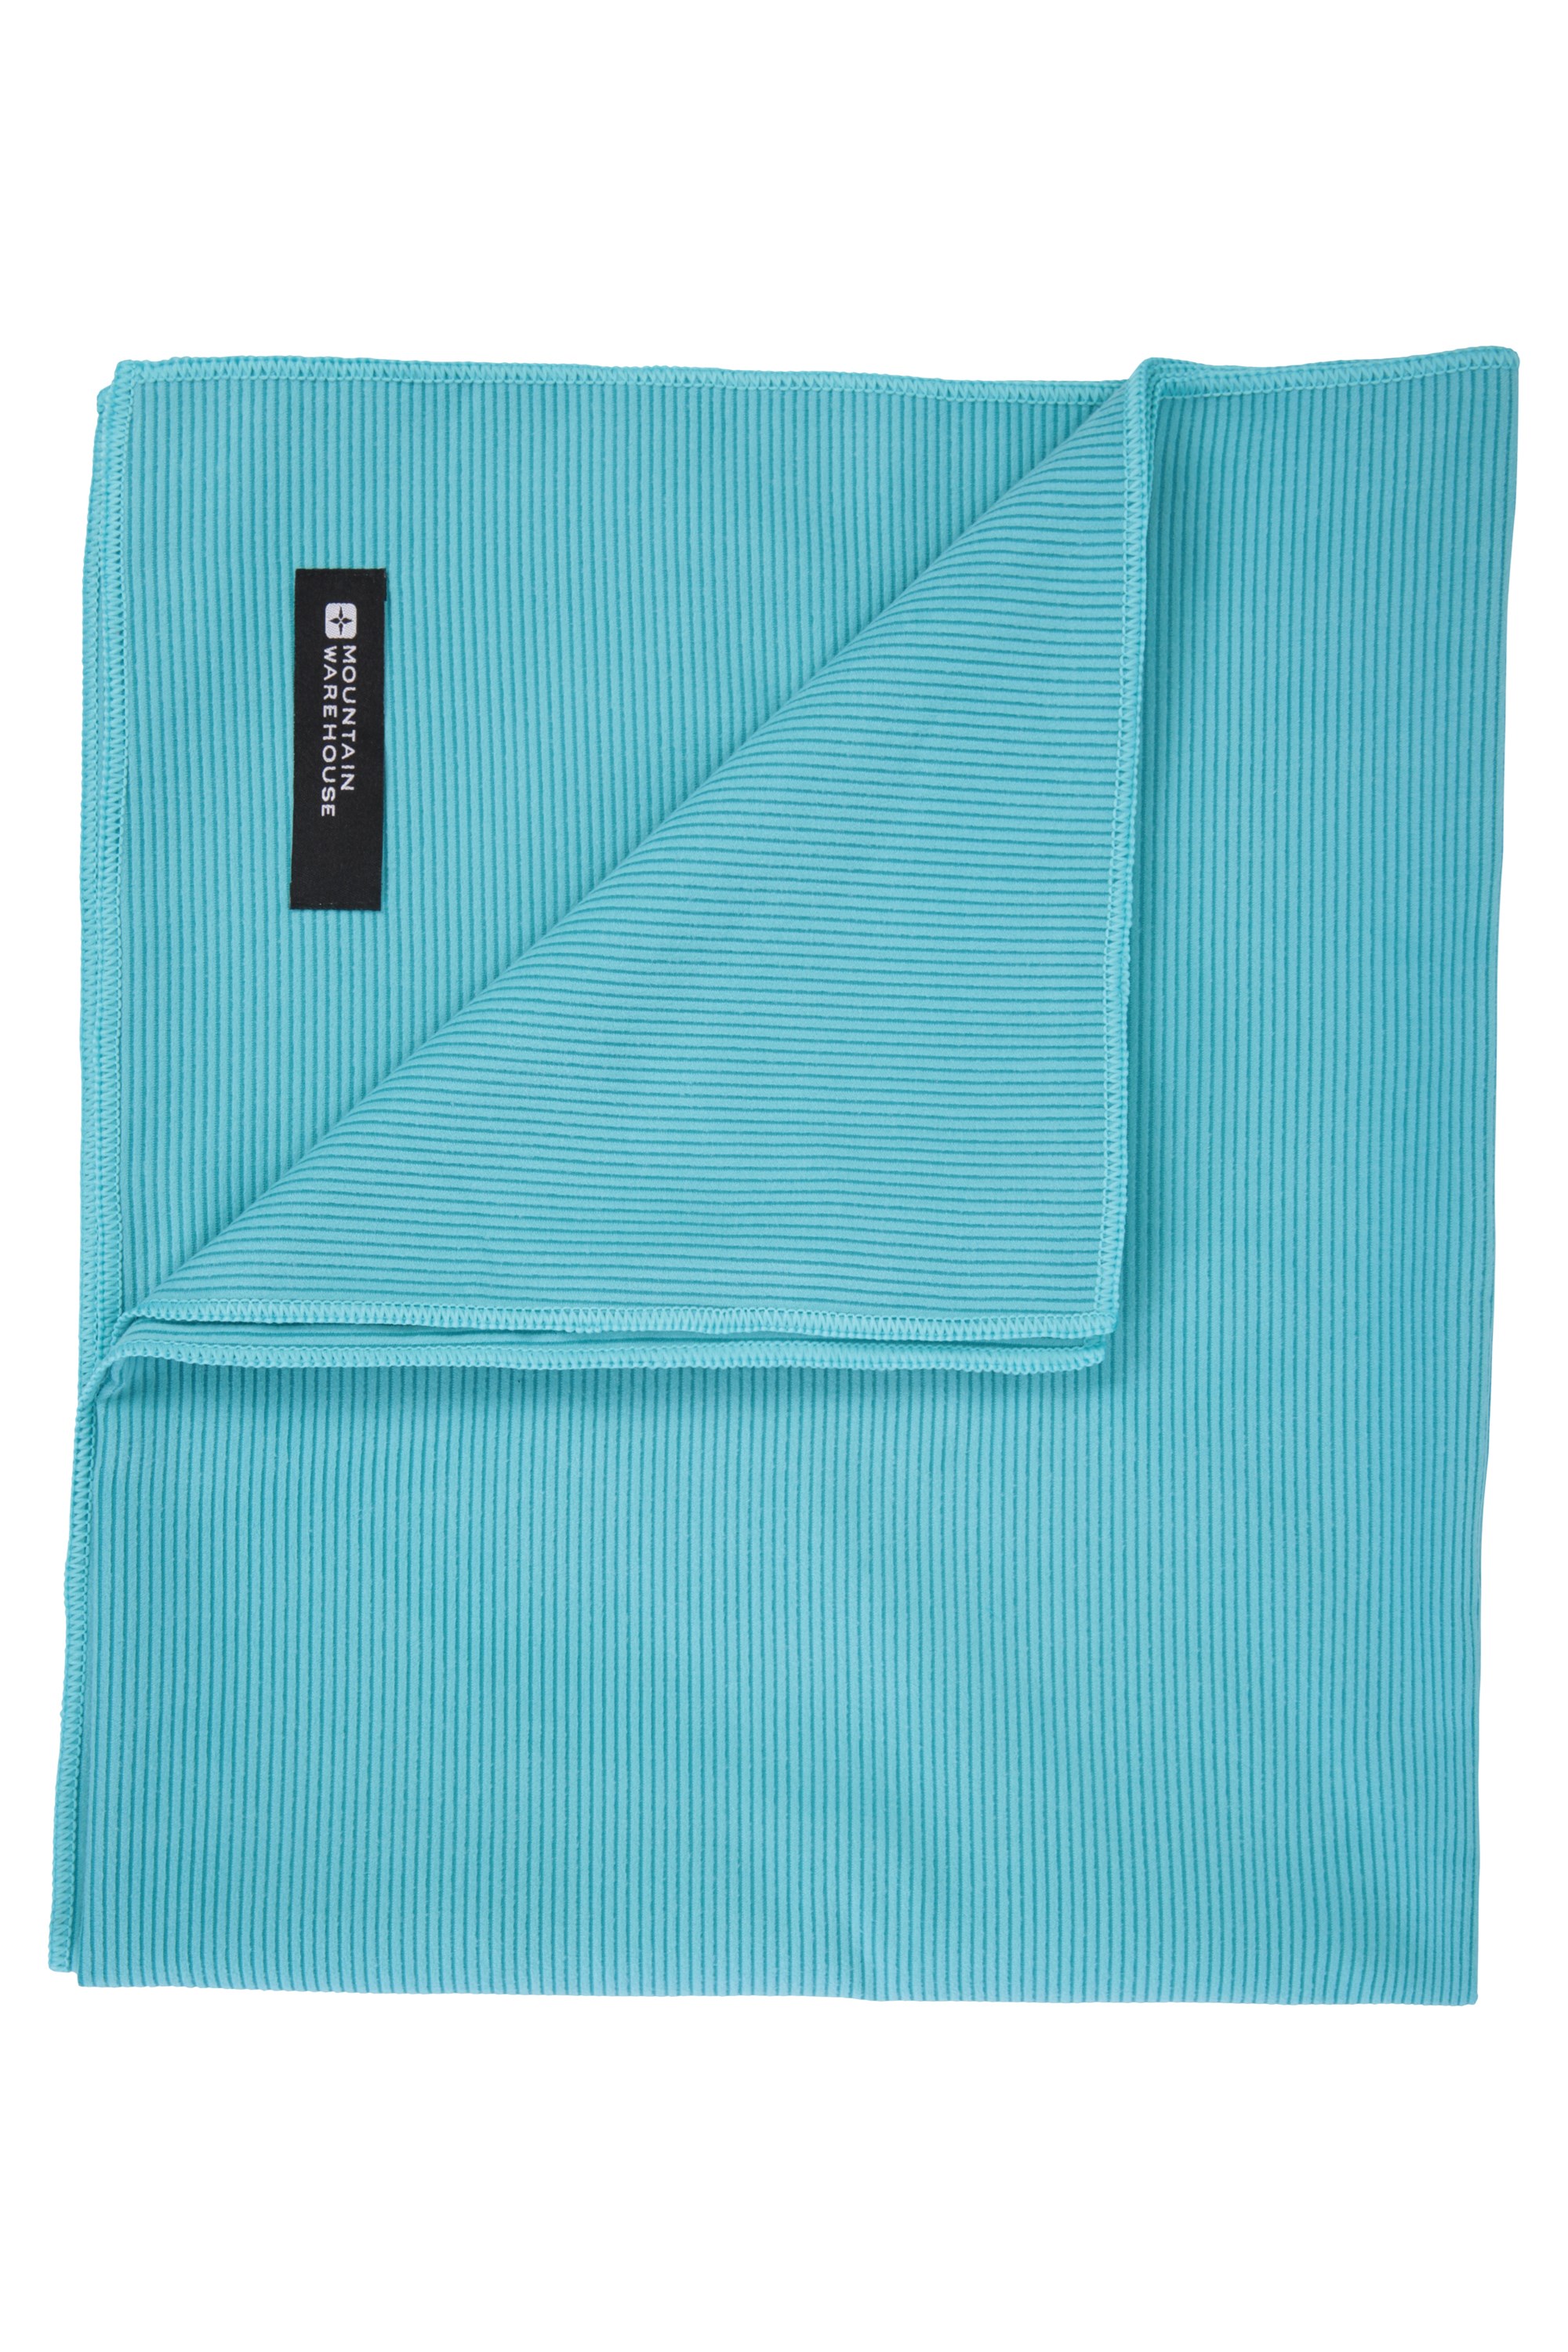 Giant Ribbed Towel - 150 X 85cm - Teal